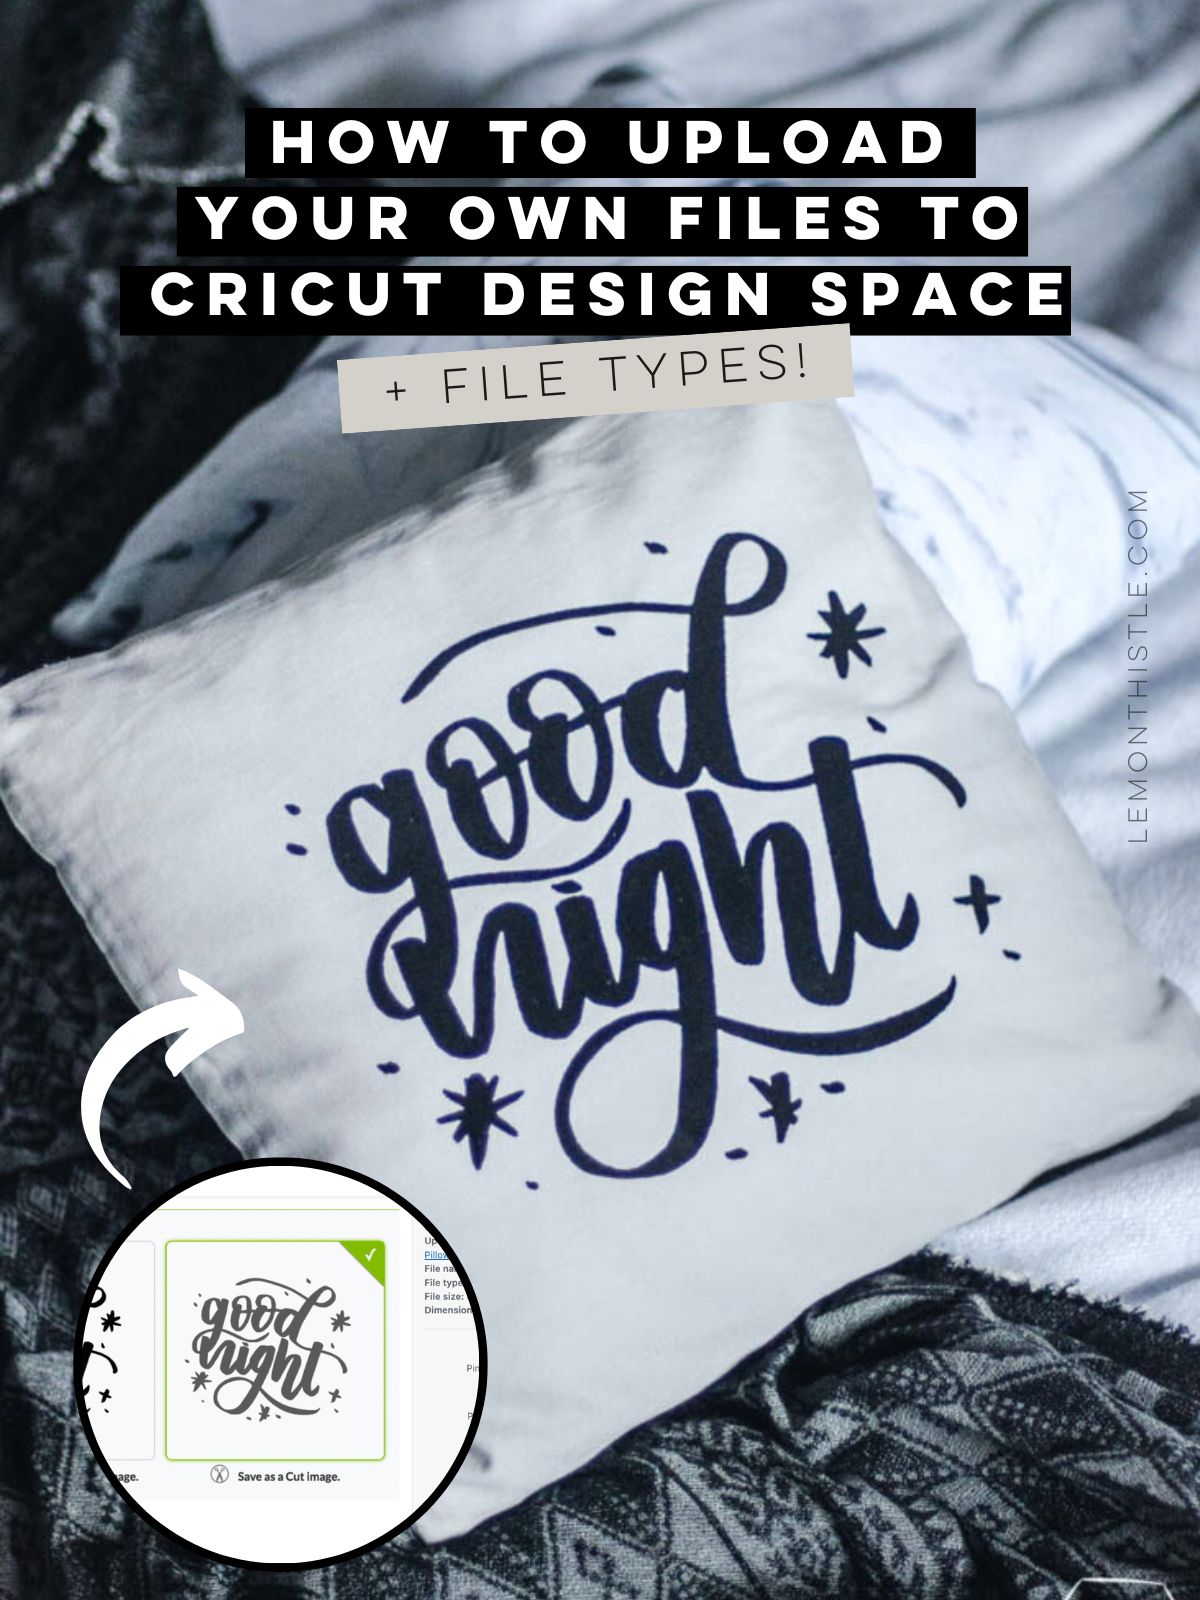 pin of pillow with hand lettered transfer. text over: how to upload your own files to cricut design space